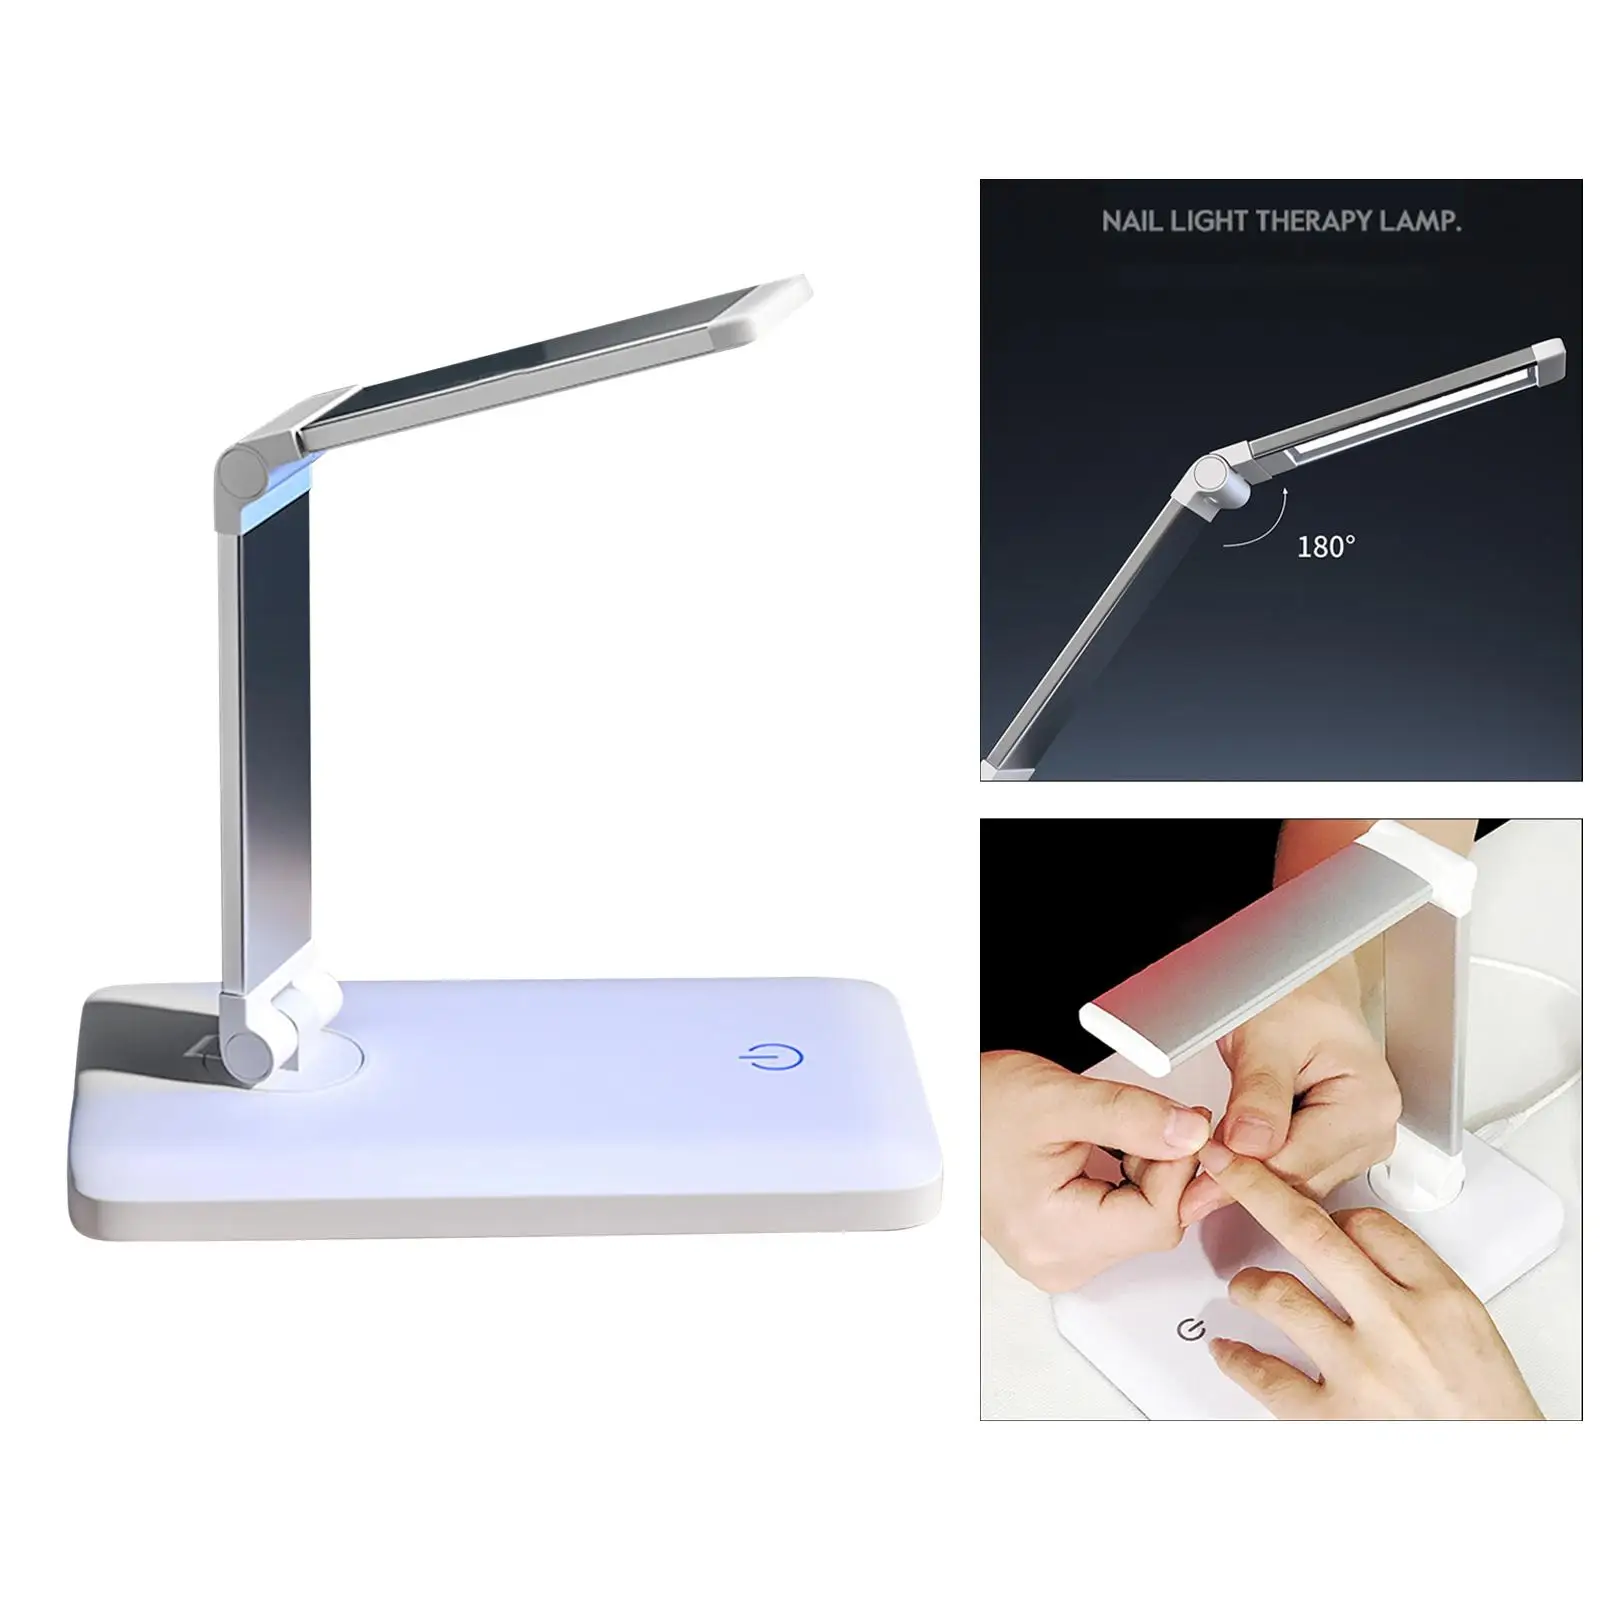 LED Nail Lamp 12W ,Professional Foldable Tools Portable USB Charging Parts ,10 LED Nail Dryer  Light Heating Lamp for  